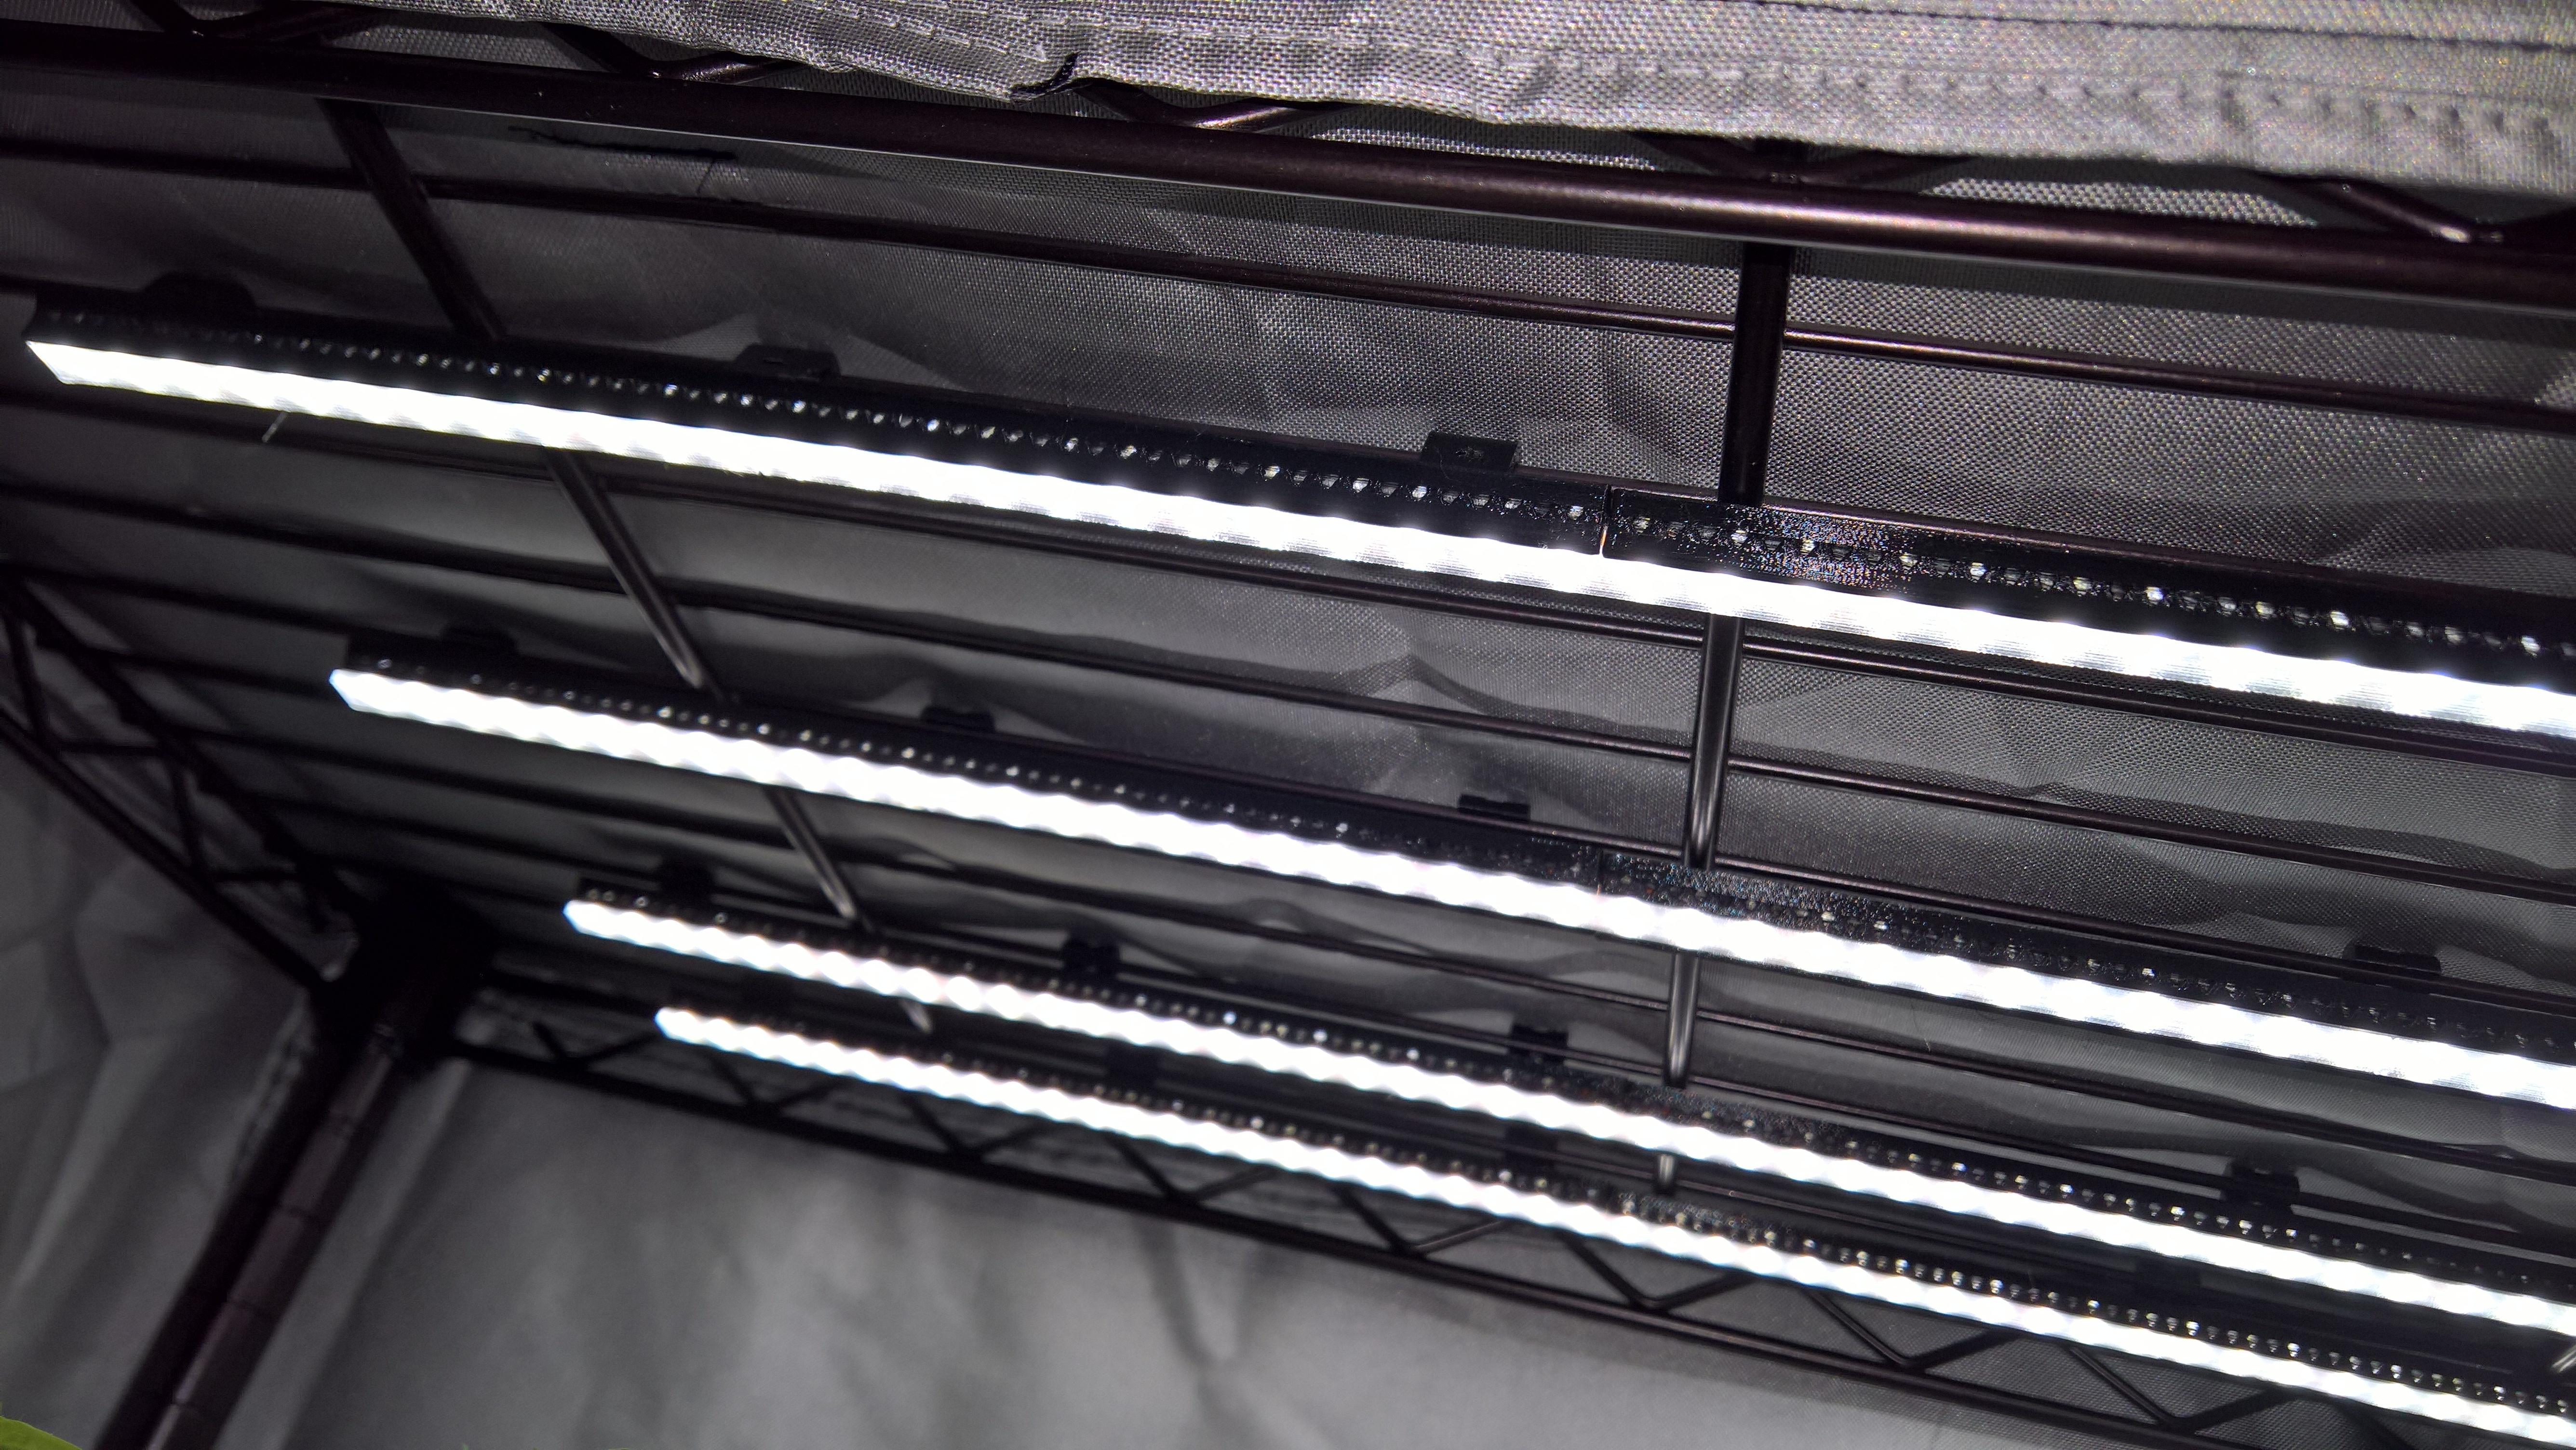 LED Grow lighting strips for your wire rack nursery or hydroponics!